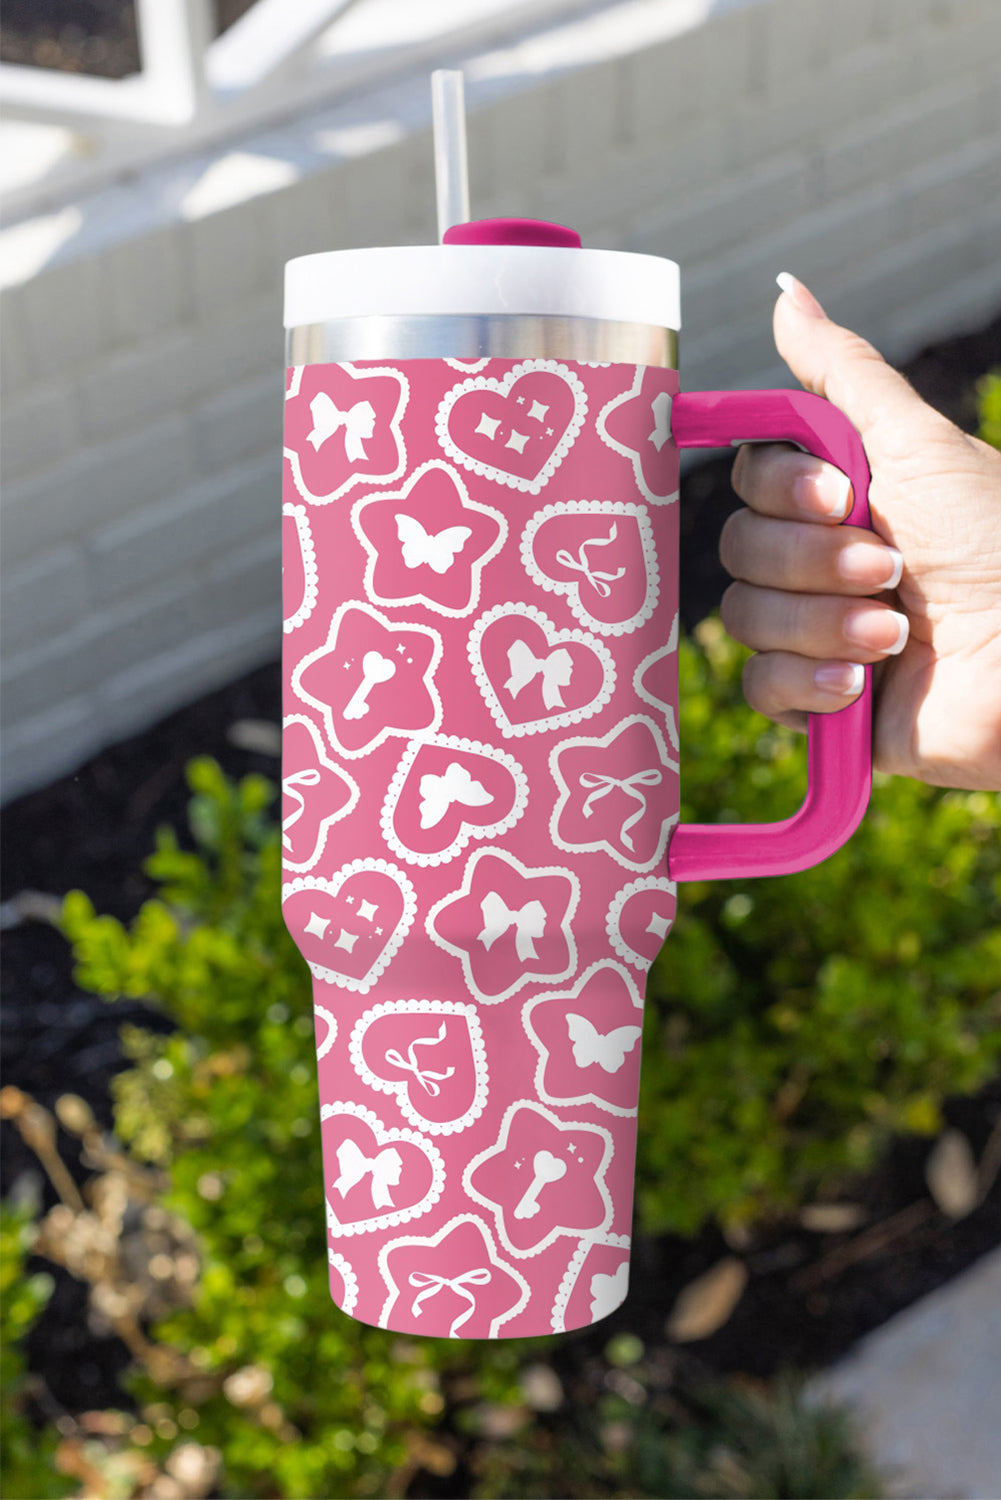 Rose Red Star Heart Shape Printed Thermos Cup with Handle 40oz